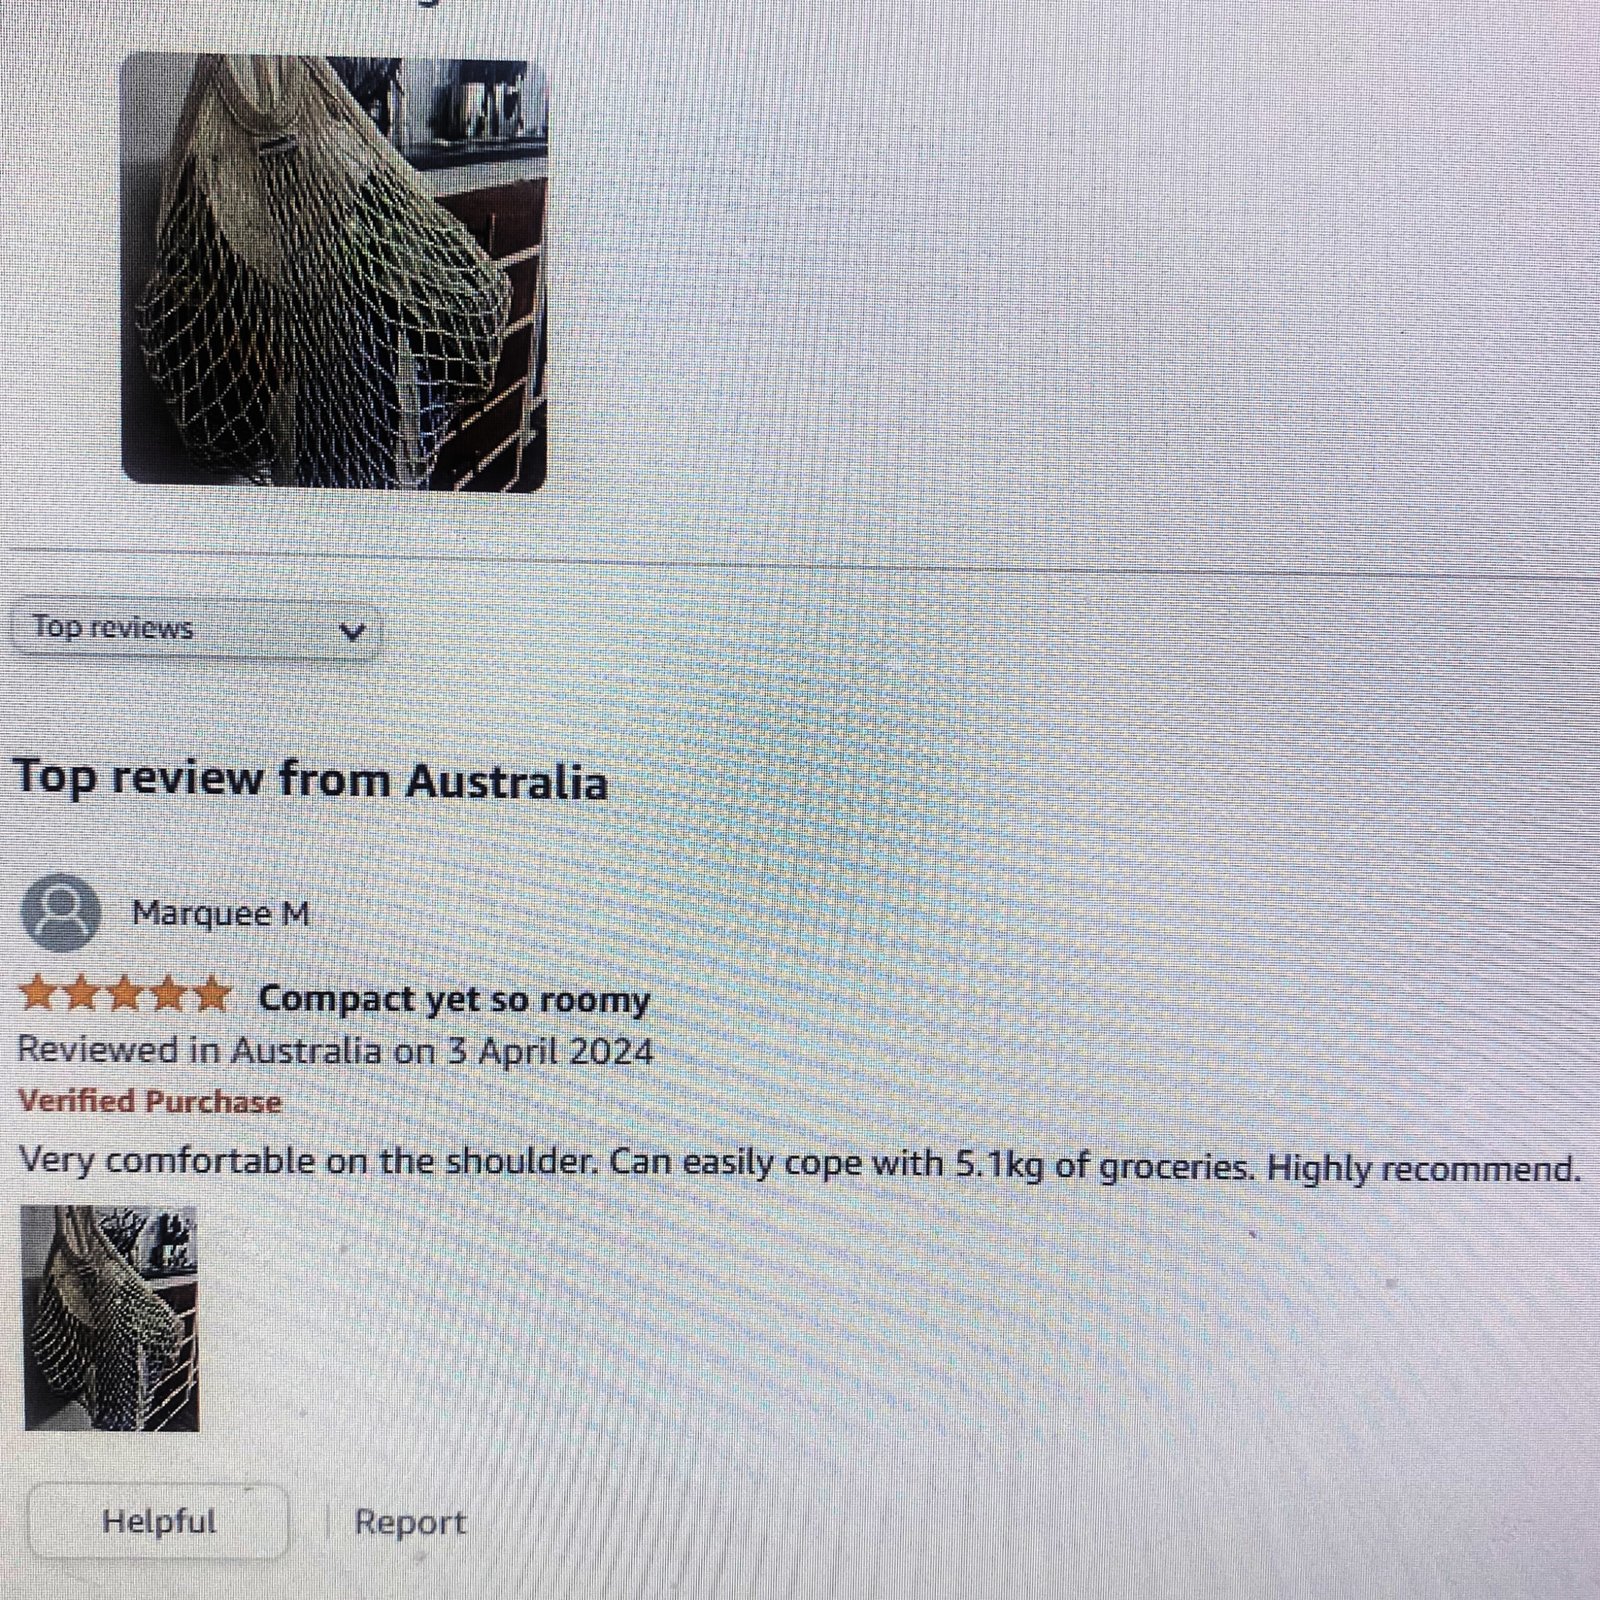 Amazon review of ANNIE cotton string bag